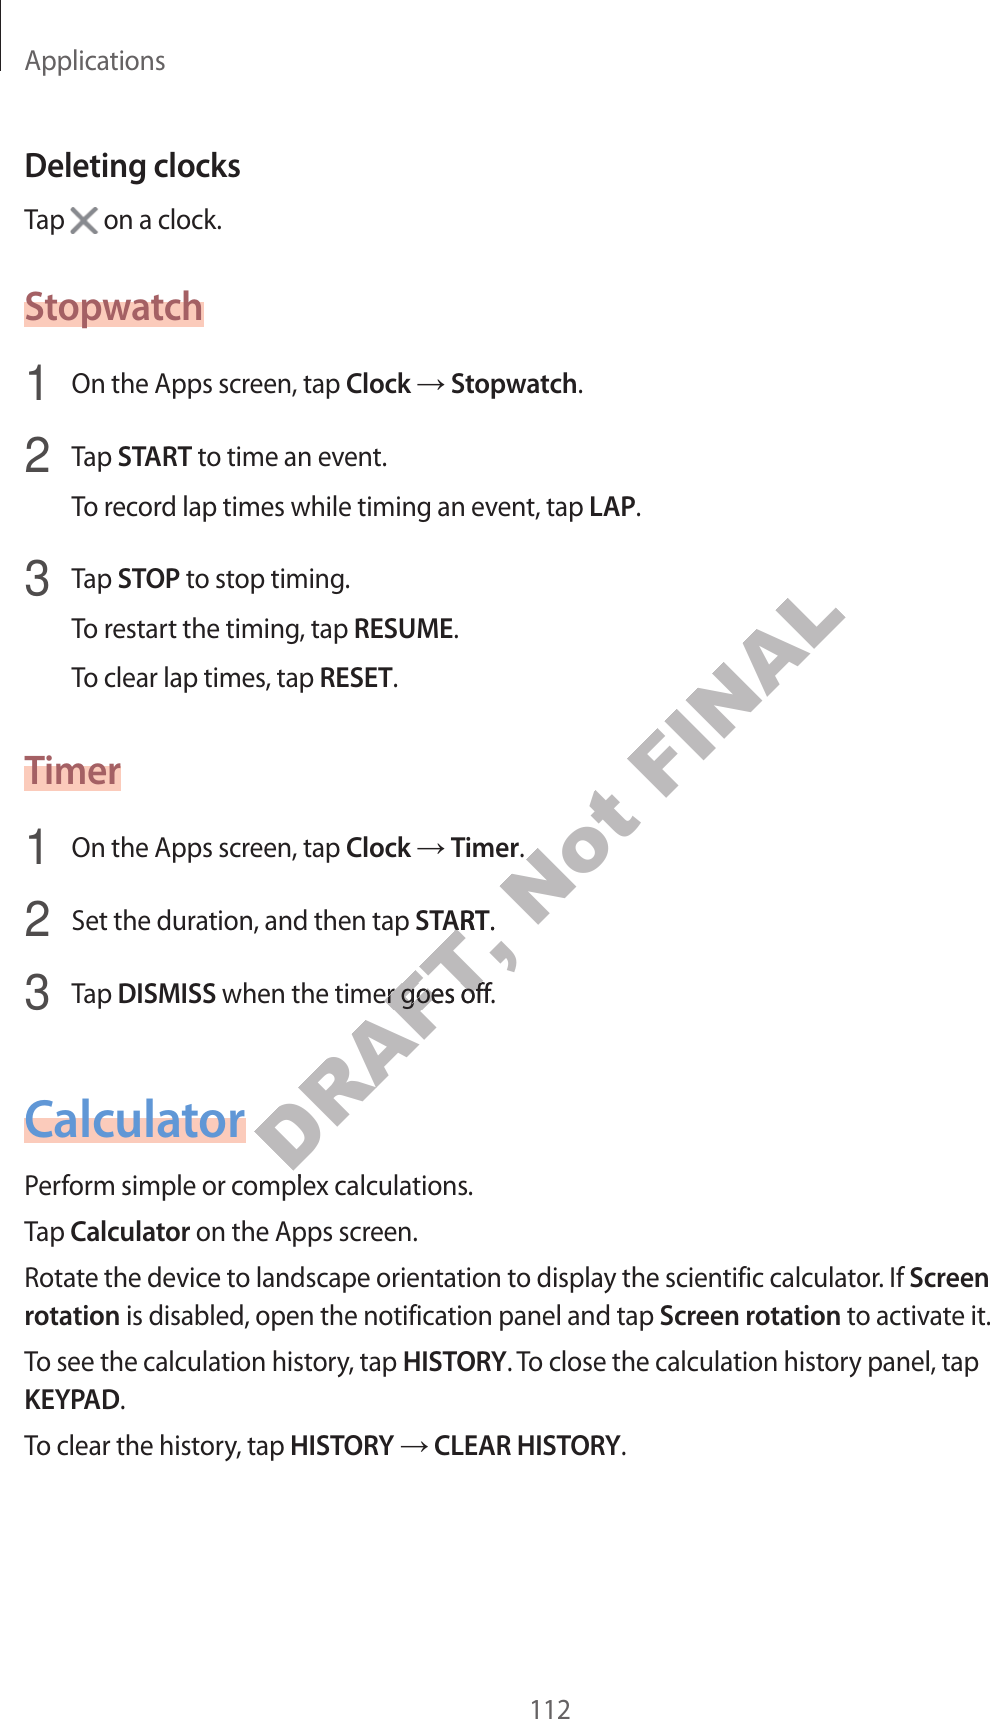 Applications112Deleting clocksTap   on a clock.Stopwatch1 On the Apps screen, tap Clock  Stopwatch.2 Tap START to time an even t.To recor d lap times while timing an ev en t, tap LAP.3 Tap STOP to stop timing .To restart the timing, tap RESUME.To clear lap times, tap RESET.Timer1 On the Apps screen, tap Clock  Timer.2 Set the duration, and then tap START.3 Tap DISMISS when the timer goes off.CalculatorP erform simple or complex calculations .Tap Calculator on the Apps screen.Rotate the device t o landscape orientation t o display the scien tific calculat or. If Screen rotation is disabled, open the notification panel and tap Screen rota tion to activate it.To see the calculation history , tap HISTORY. To close the calculation history panel, tap KEYPAD.To clear the history, tap HISTORY  CLEAR HISTORY.DRAFT, STARTDRAFT, START.DRAFT, . when the timer goes off.DRAFT,  when the timer goes off.P erform simple or complex calculations .DRAFT, P erform simple or complex calculations .Not FINAL